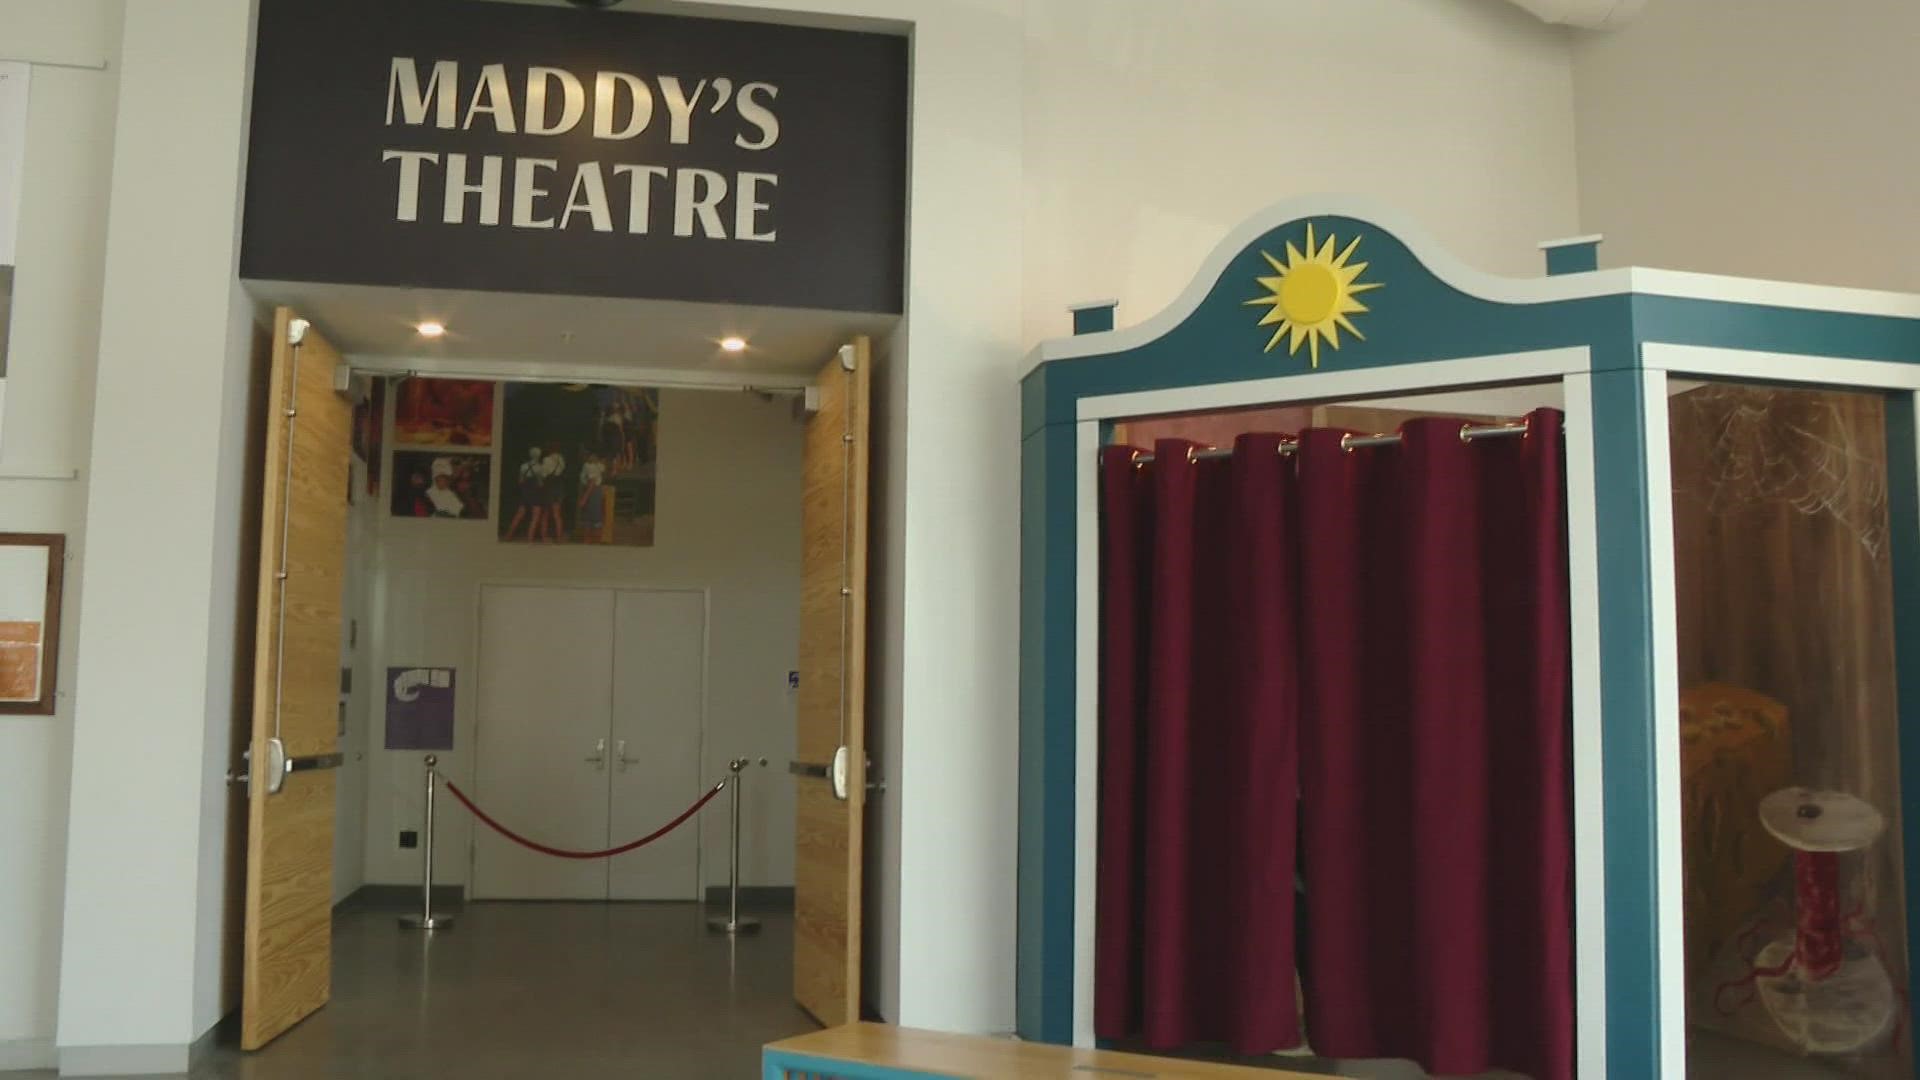 It's the longest running children's theatre in the nation, and it has a new home.